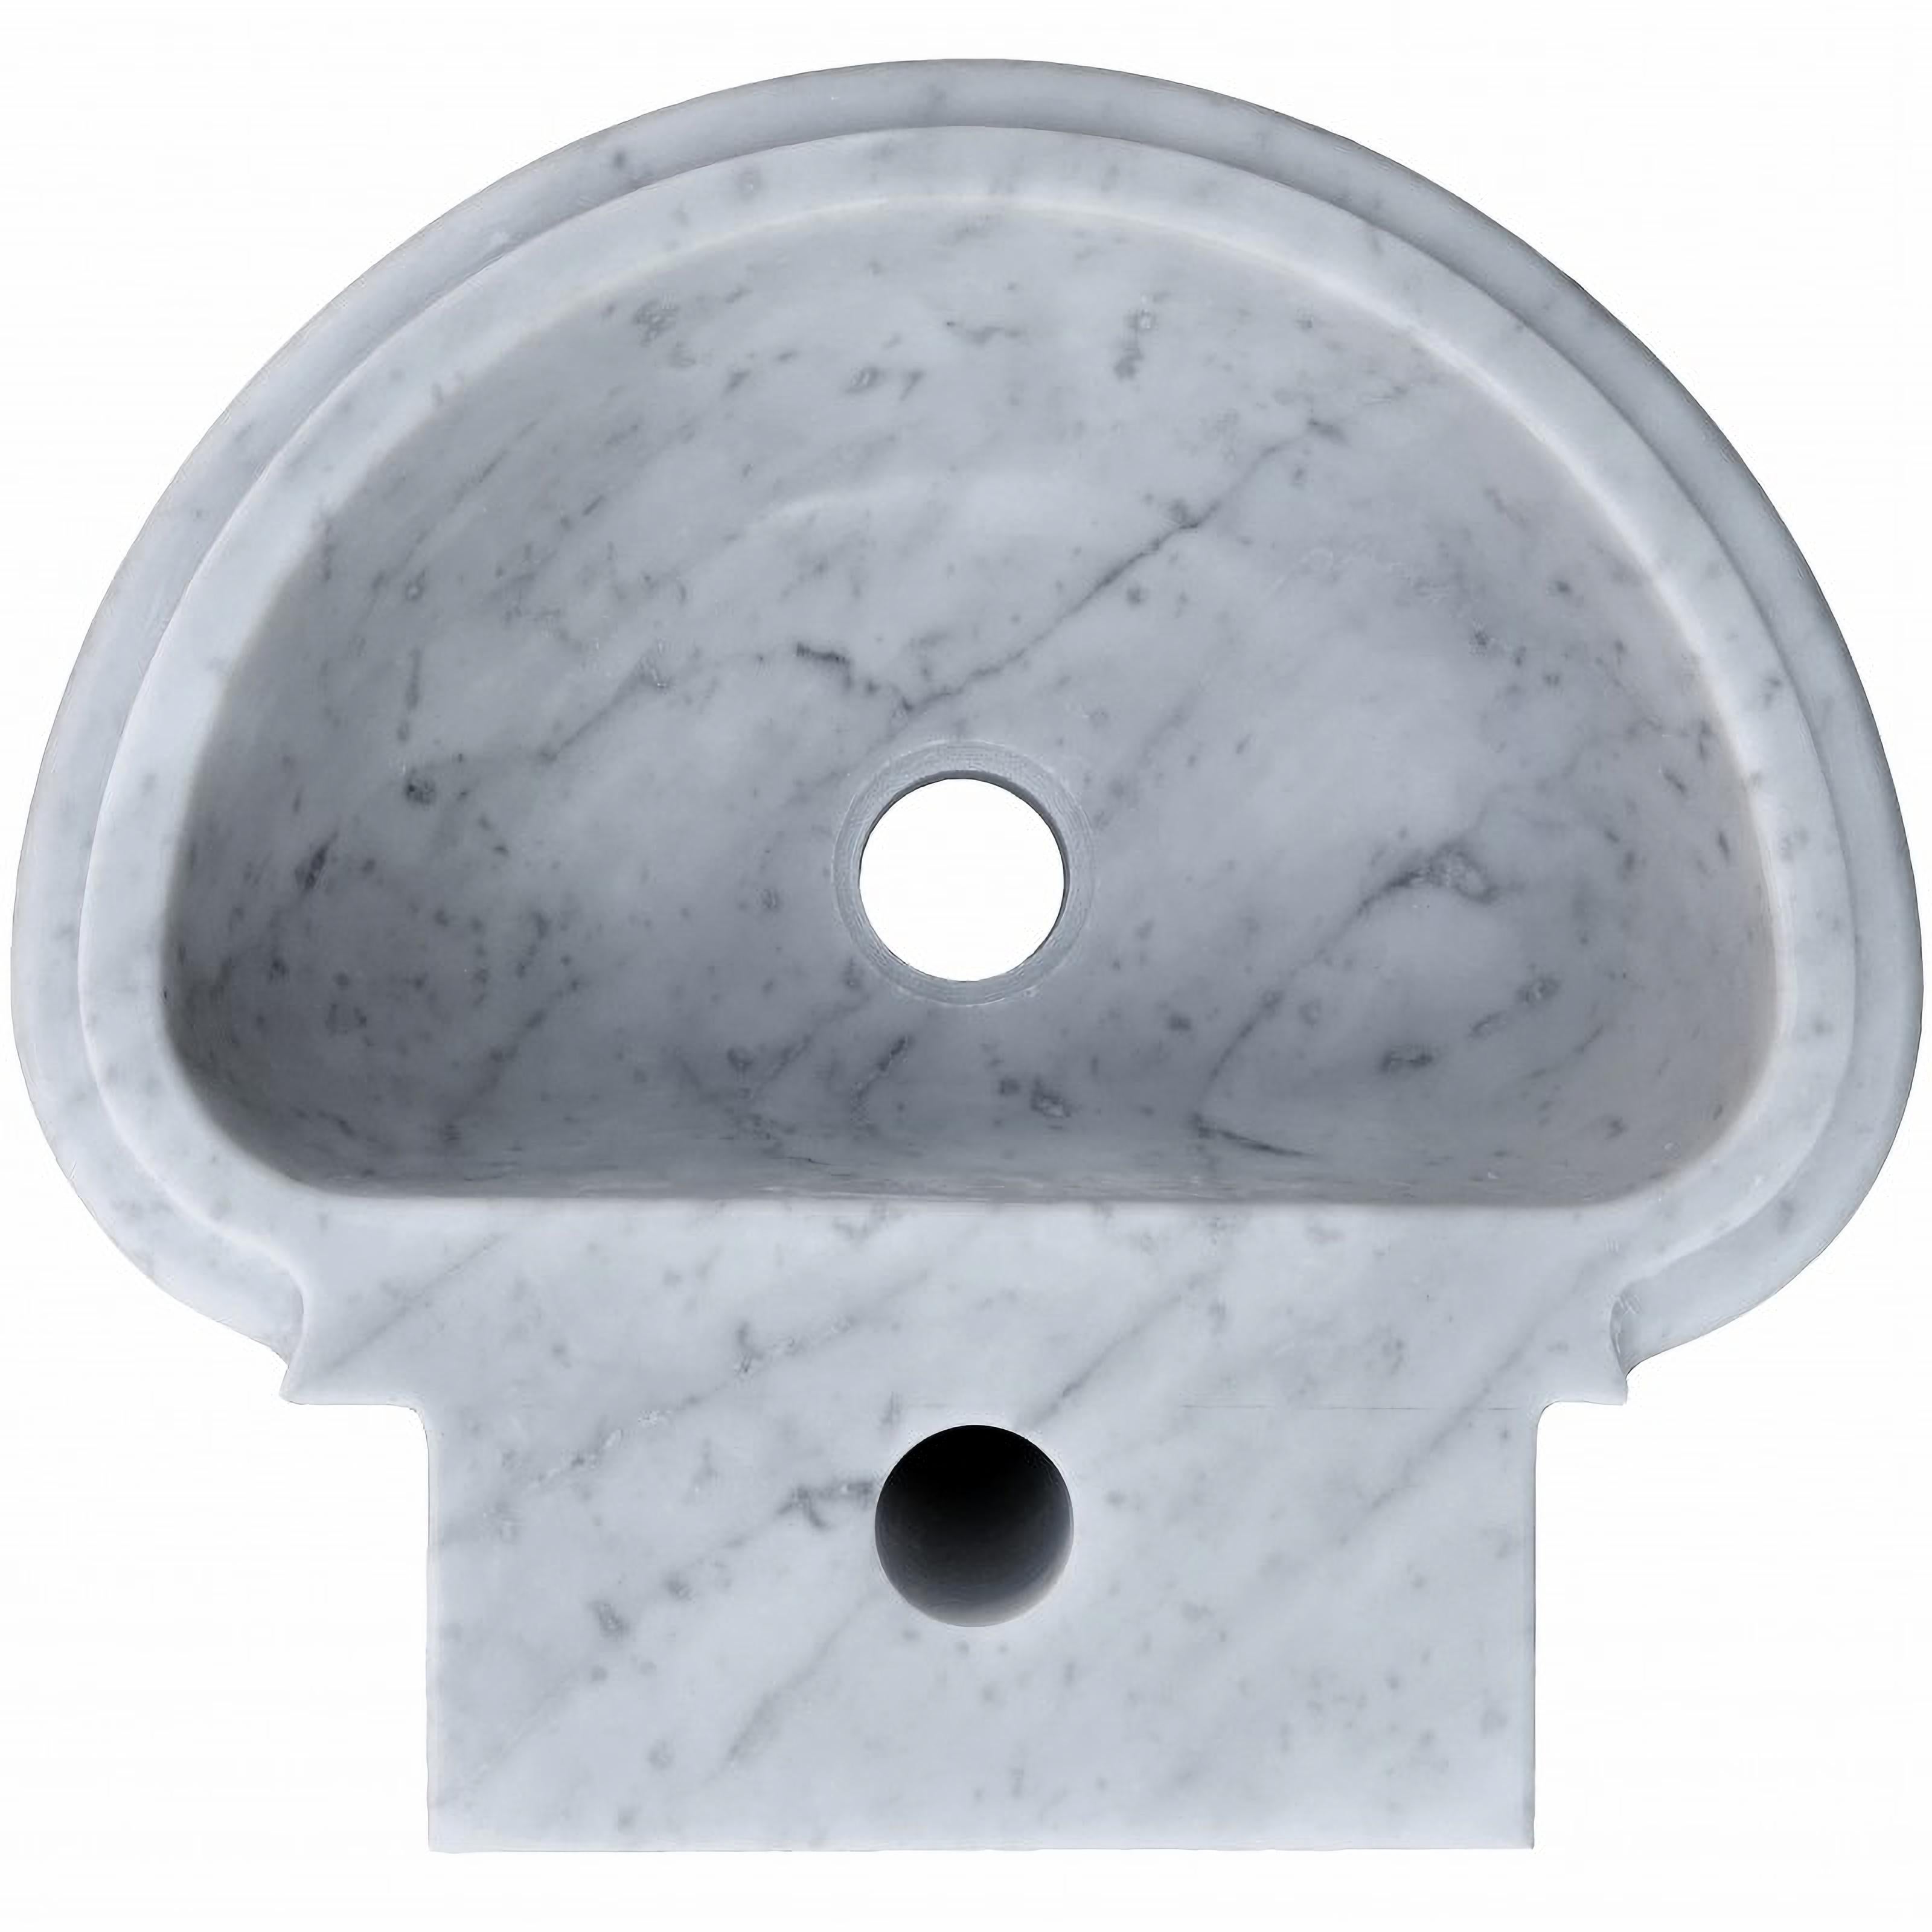 Hand-Crafted MAGNIFICENT ROUND WHITE CARRARA MARBLE SINK 20th Century Handmade For Sale